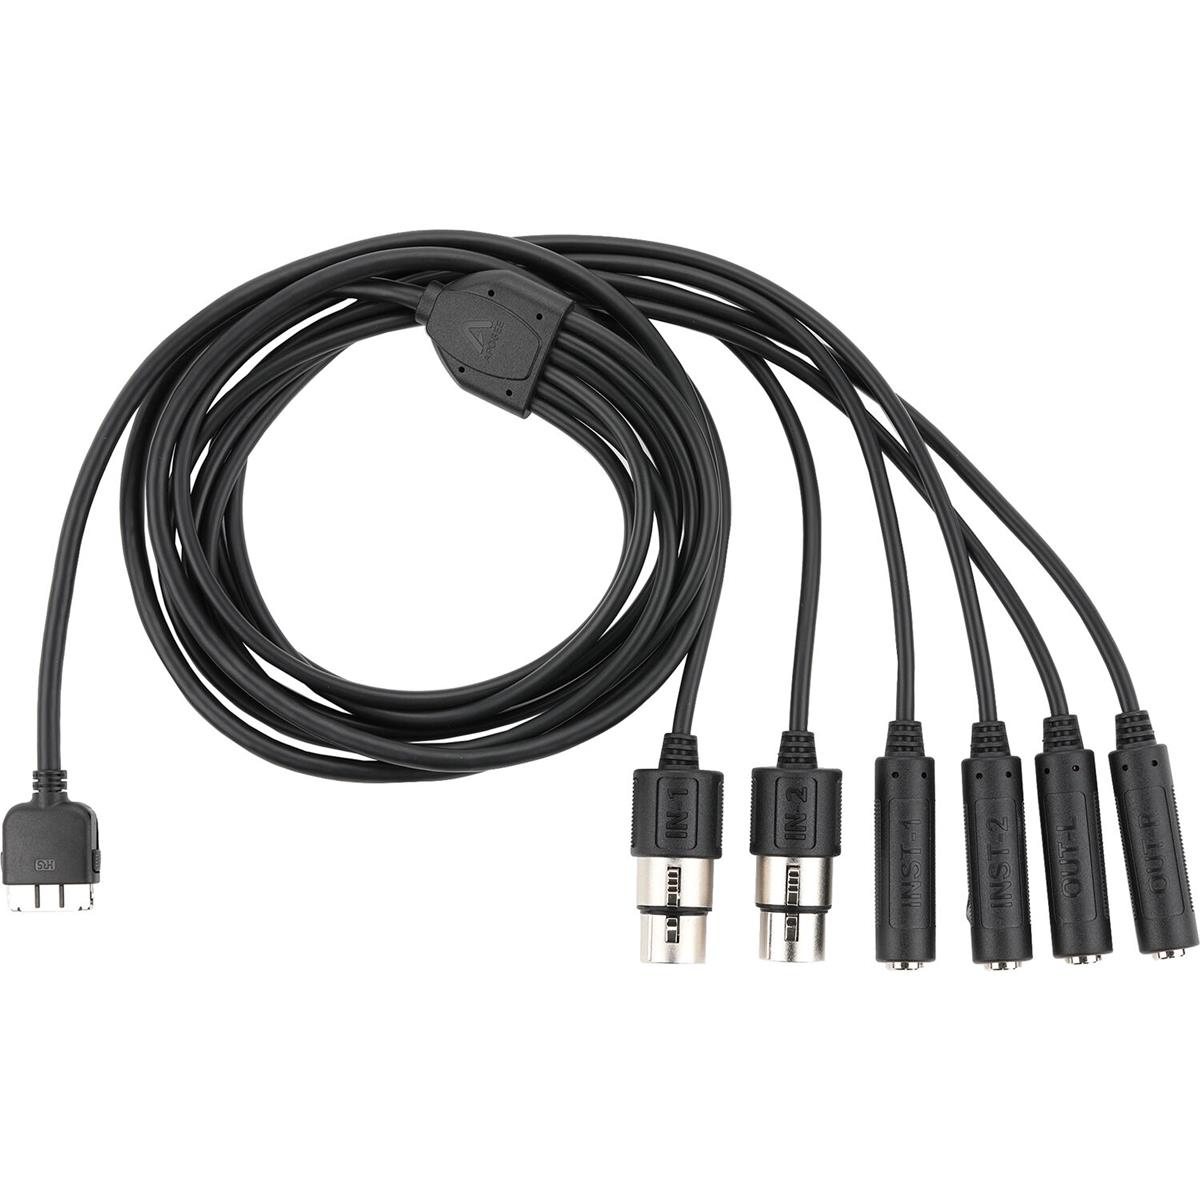 Image of Apogee Electronics Duet 3 Breakout Cable